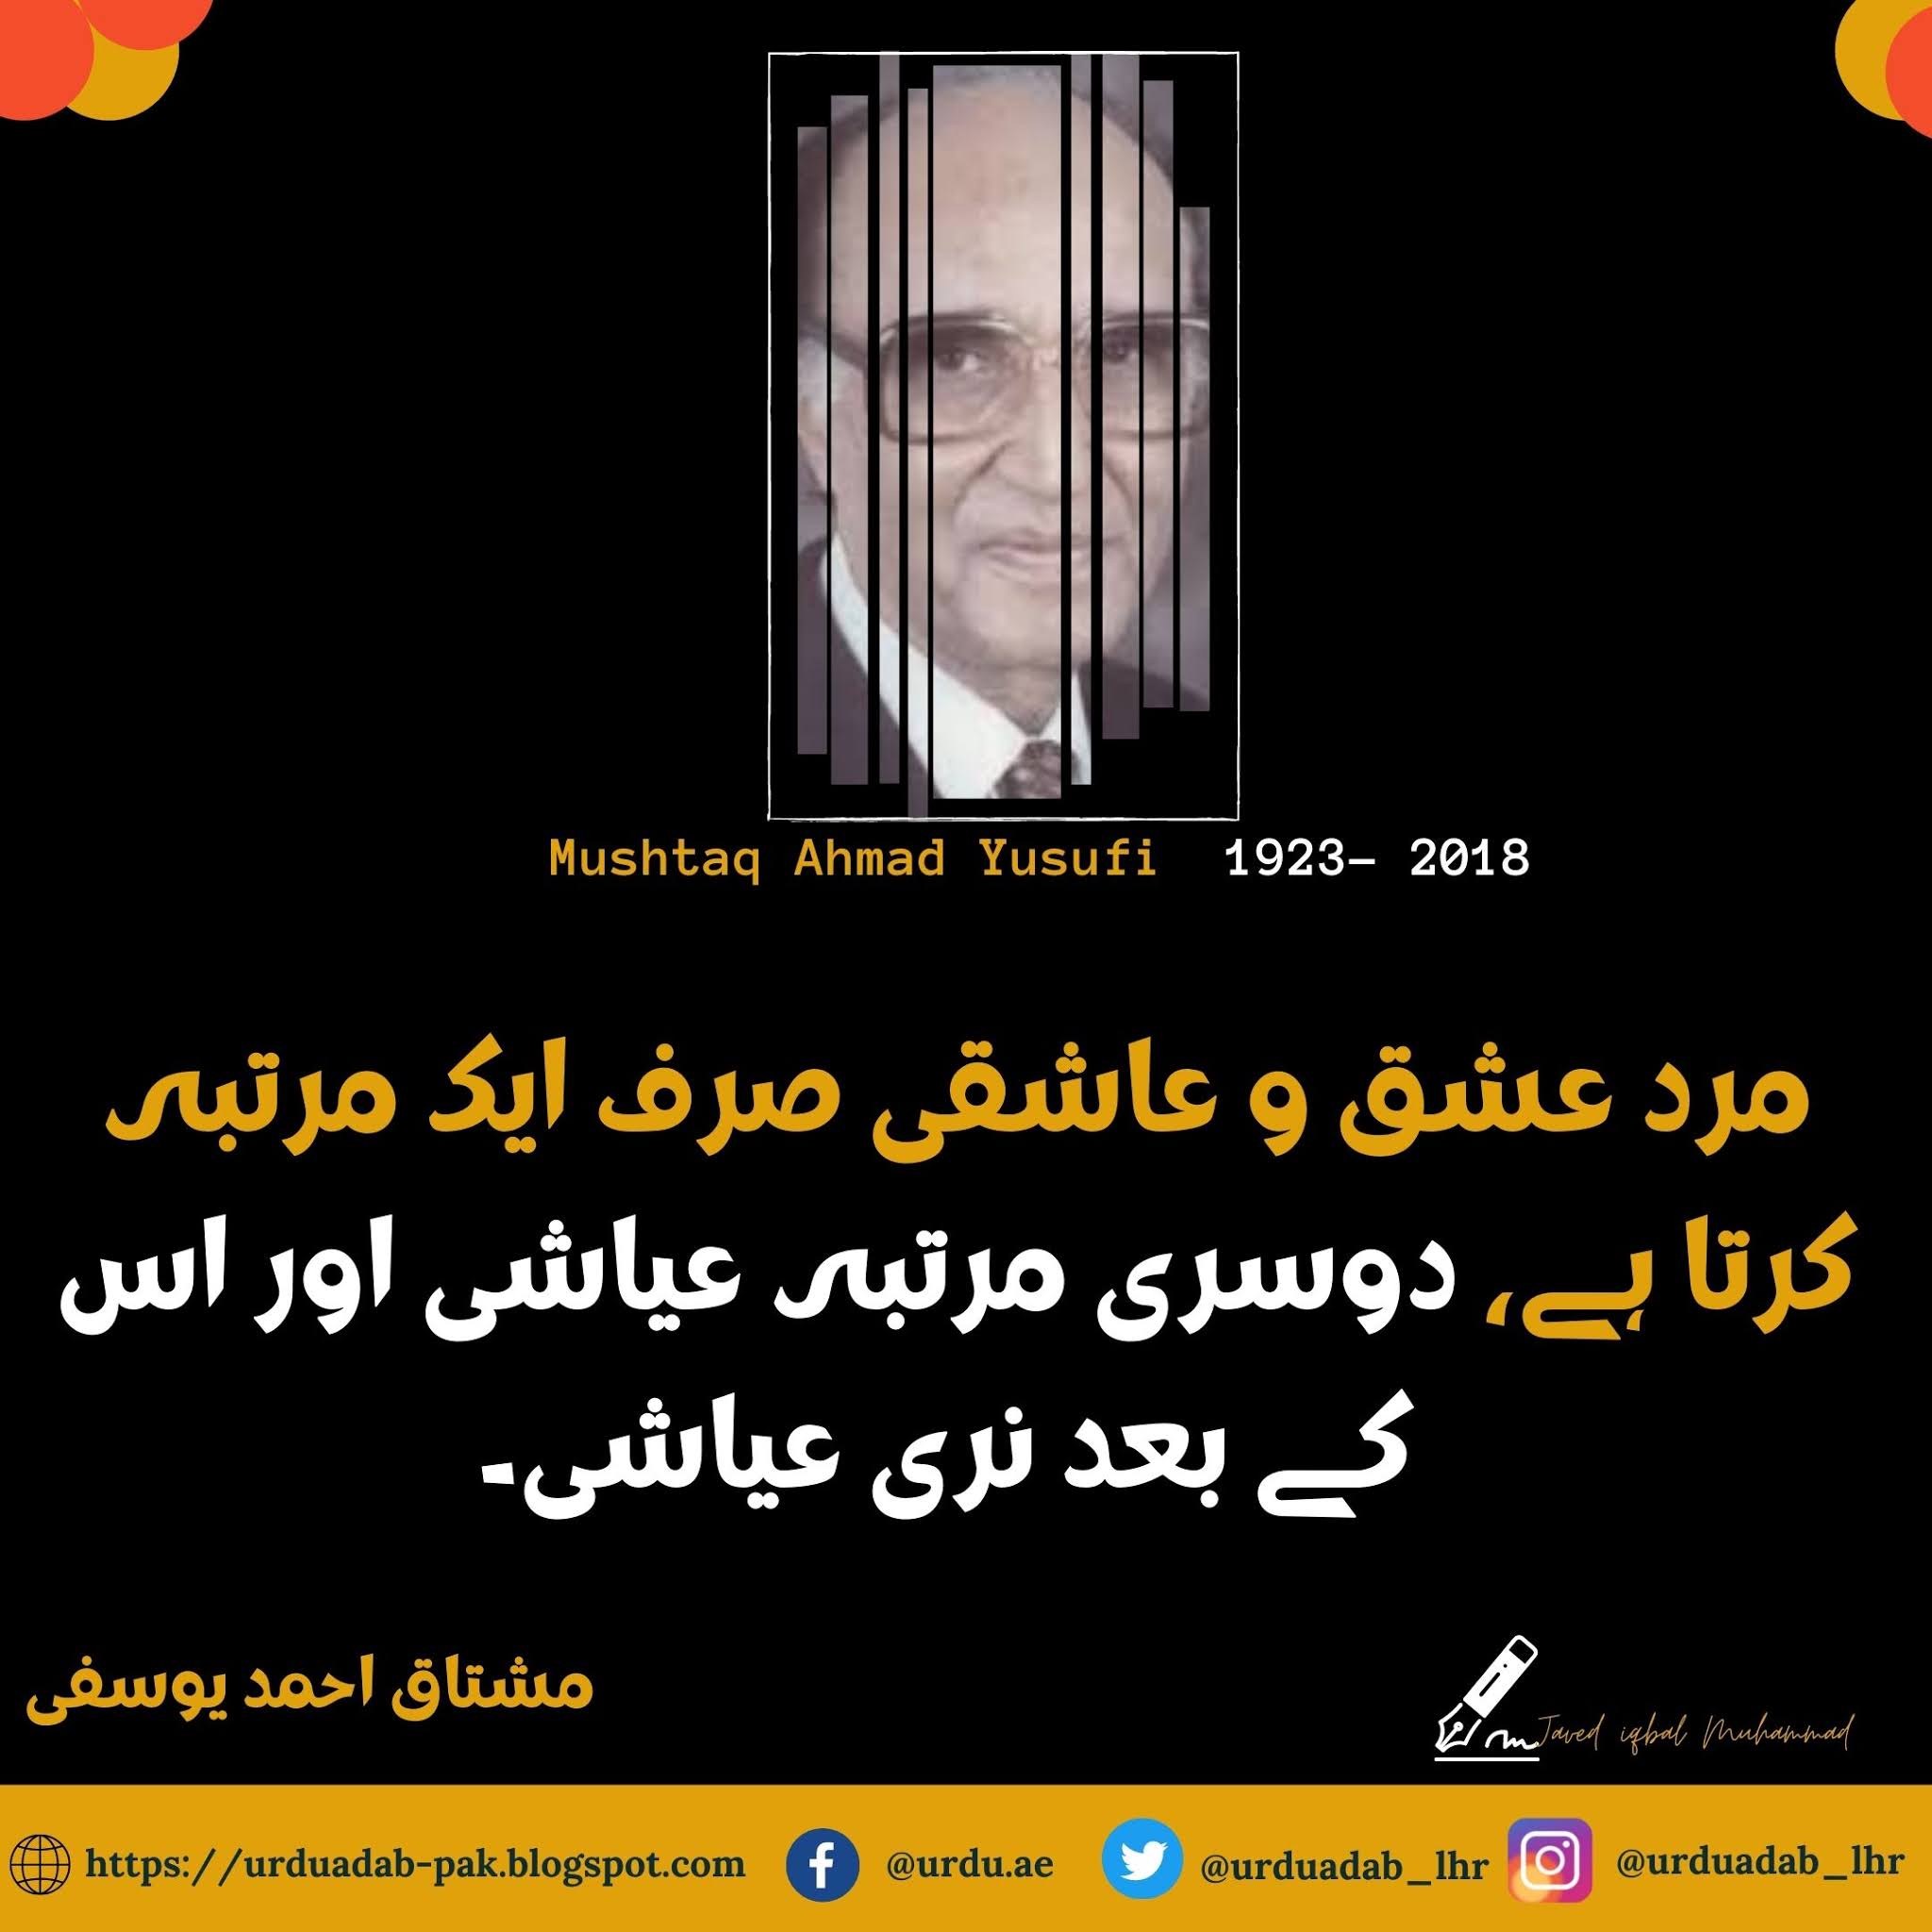 20-Best-Quotes-of-Mushtaq-Ahmed-Yousufi-Quotes-Mushtaq-Ahmad-Yusufi-Funny Quotes-Mushtaq-Ahmad- Yusufi-Tanz-o-Mazah-mushtaq-ahmad-yusufi-quotes-in hindi-Mushtaq-Ahmed-Yousufi-Quotes